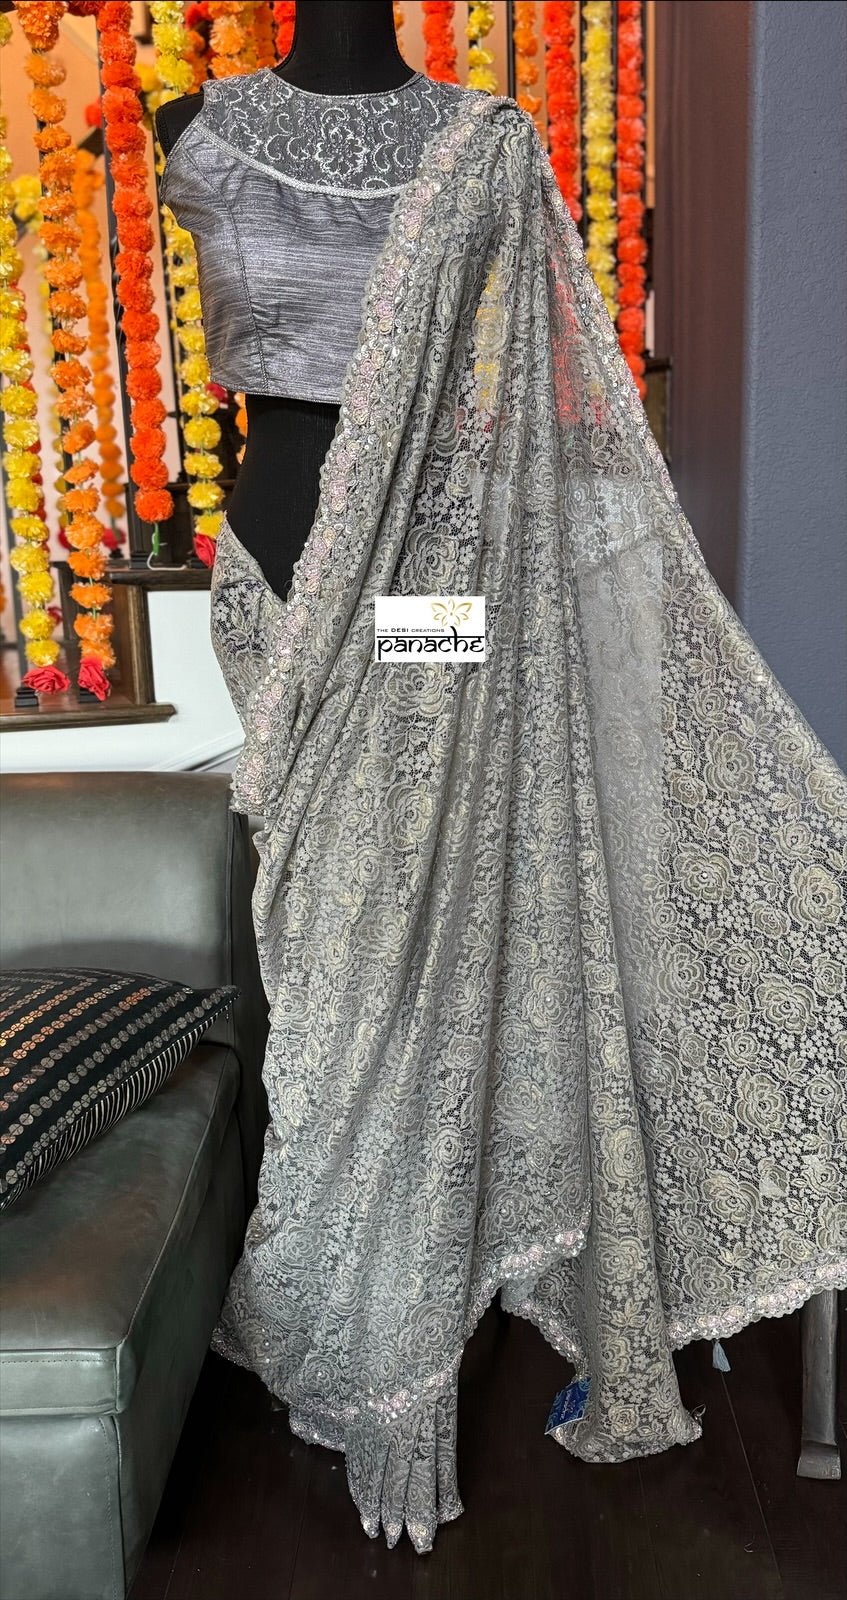 Designer Chantily Lace Saree - Grey Hand Embroidered